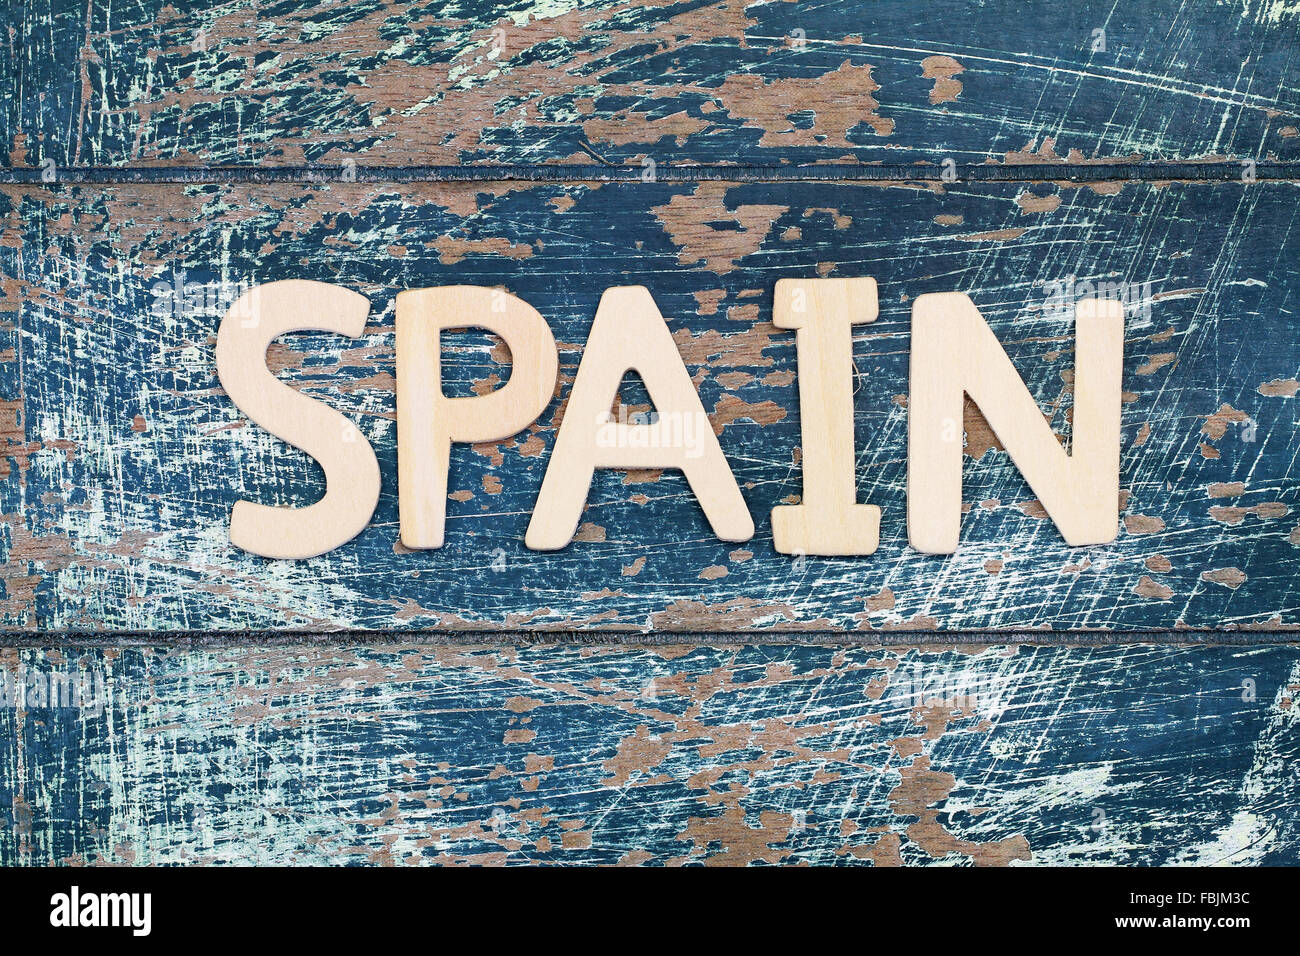 Spain written with wooden letters on rustic surface Stock Photo